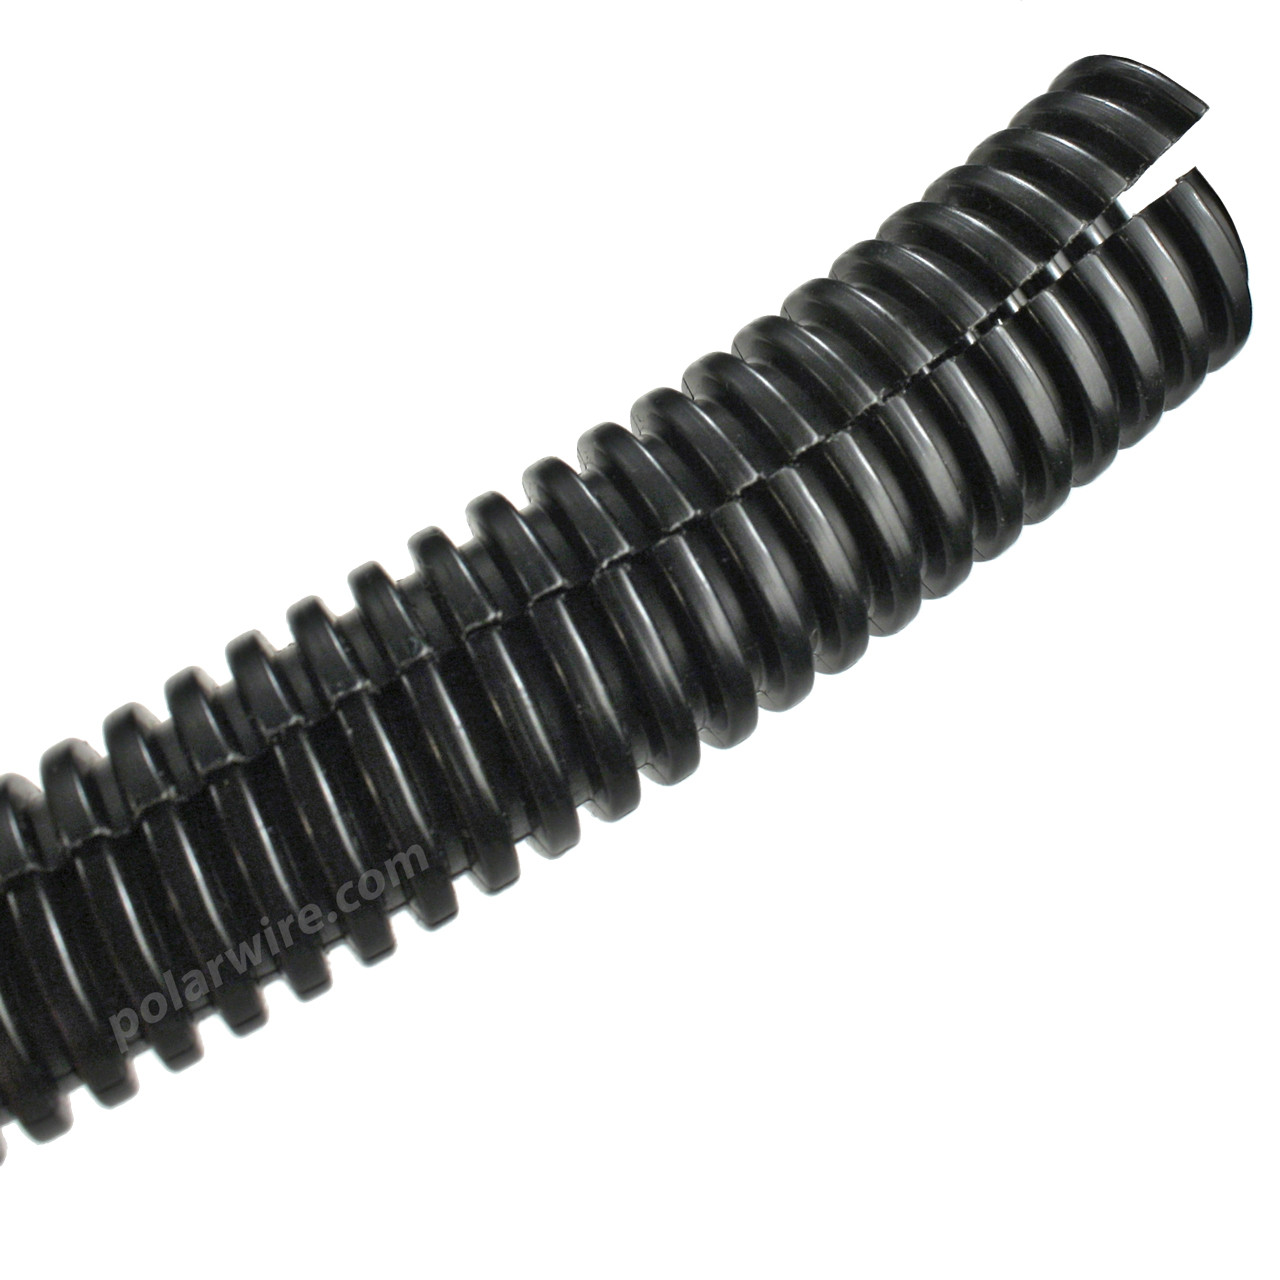 Full length split for fast, easy installation. Corrugation lets loom bend easily and adds strength and crush resistance. 